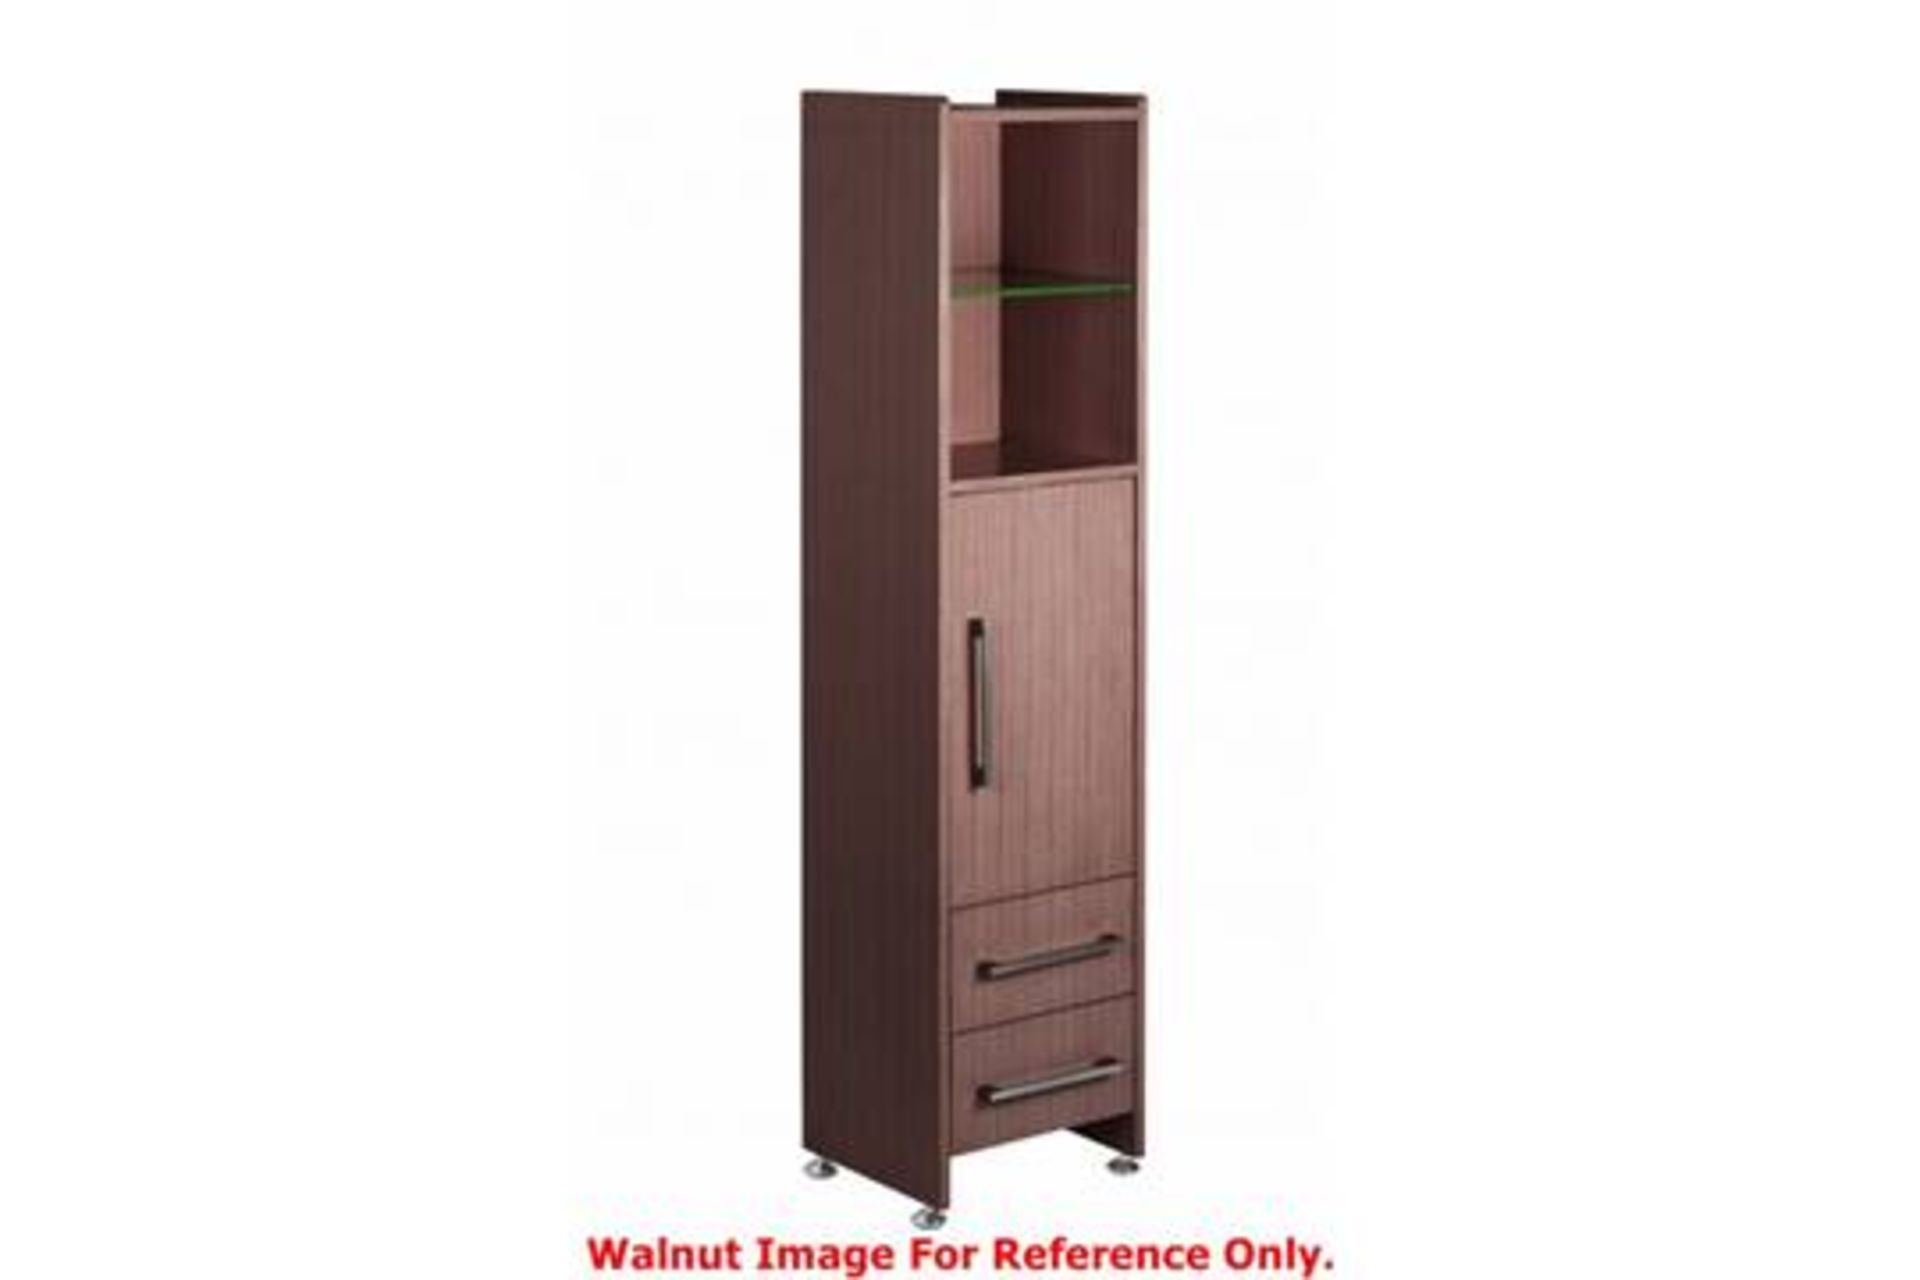 1 x Vogue ARC Bathroom Series 2 Tall Boy Unit - WENGE - Contemporary Design - Manufactured to the - Image 3 of 3